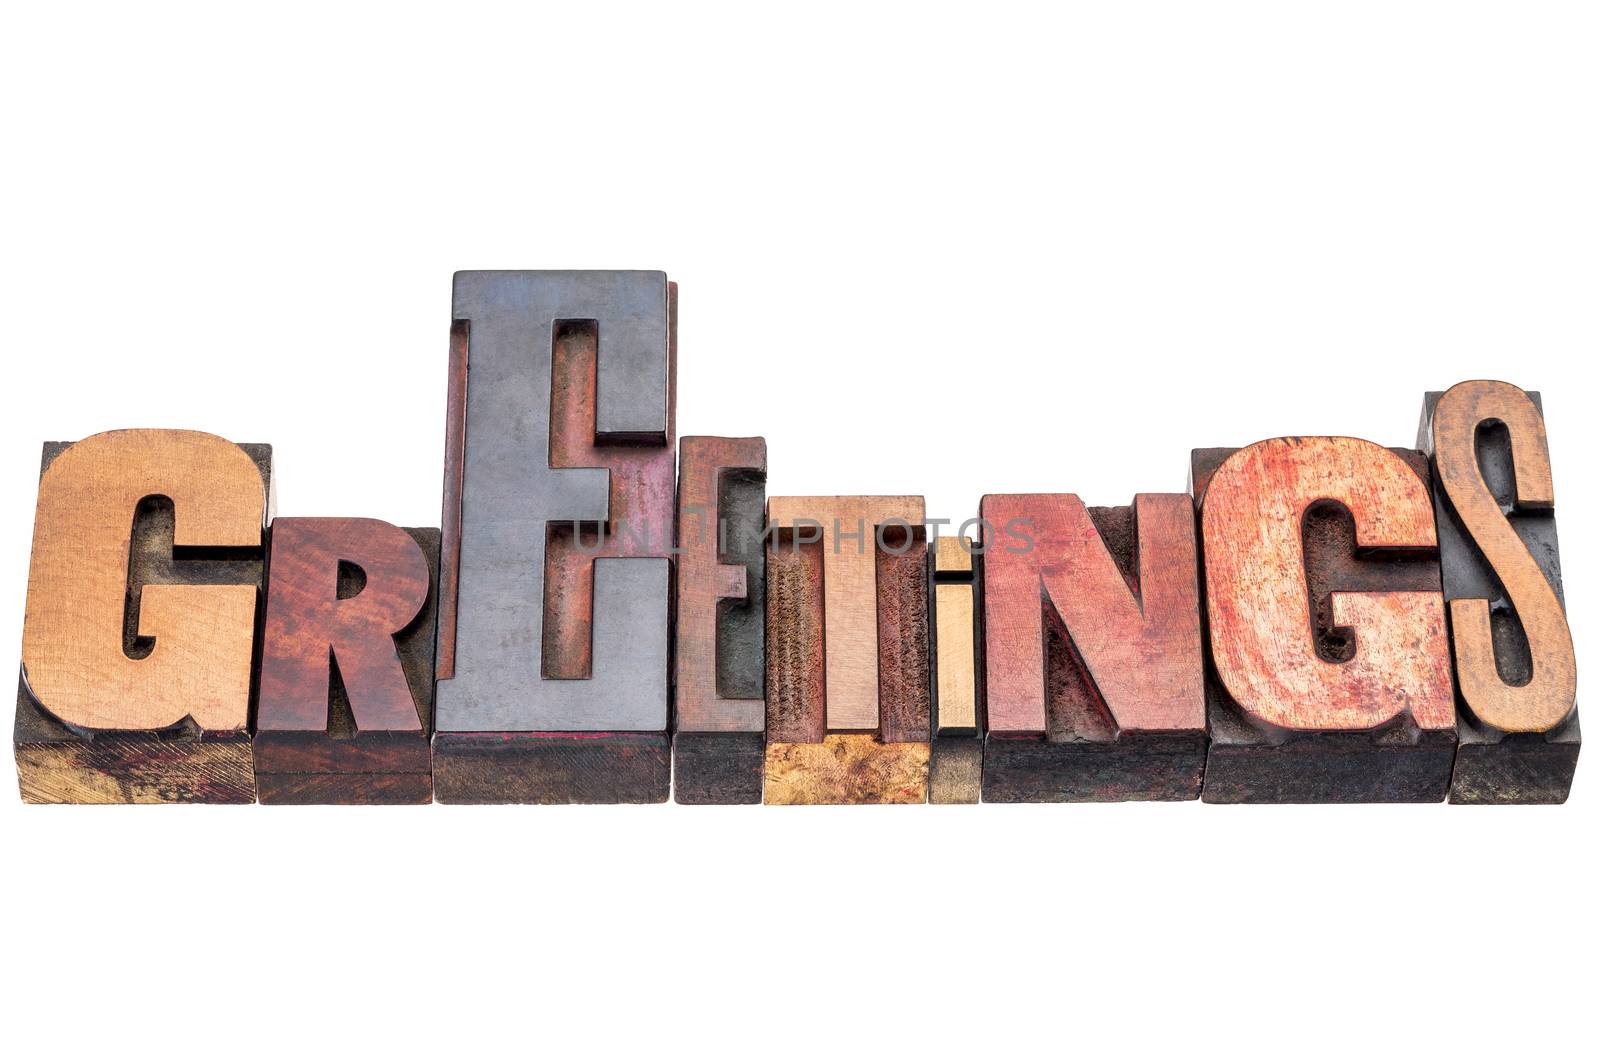 greetings word abstract - isolated text in vintage letterpress wood type printing blocks